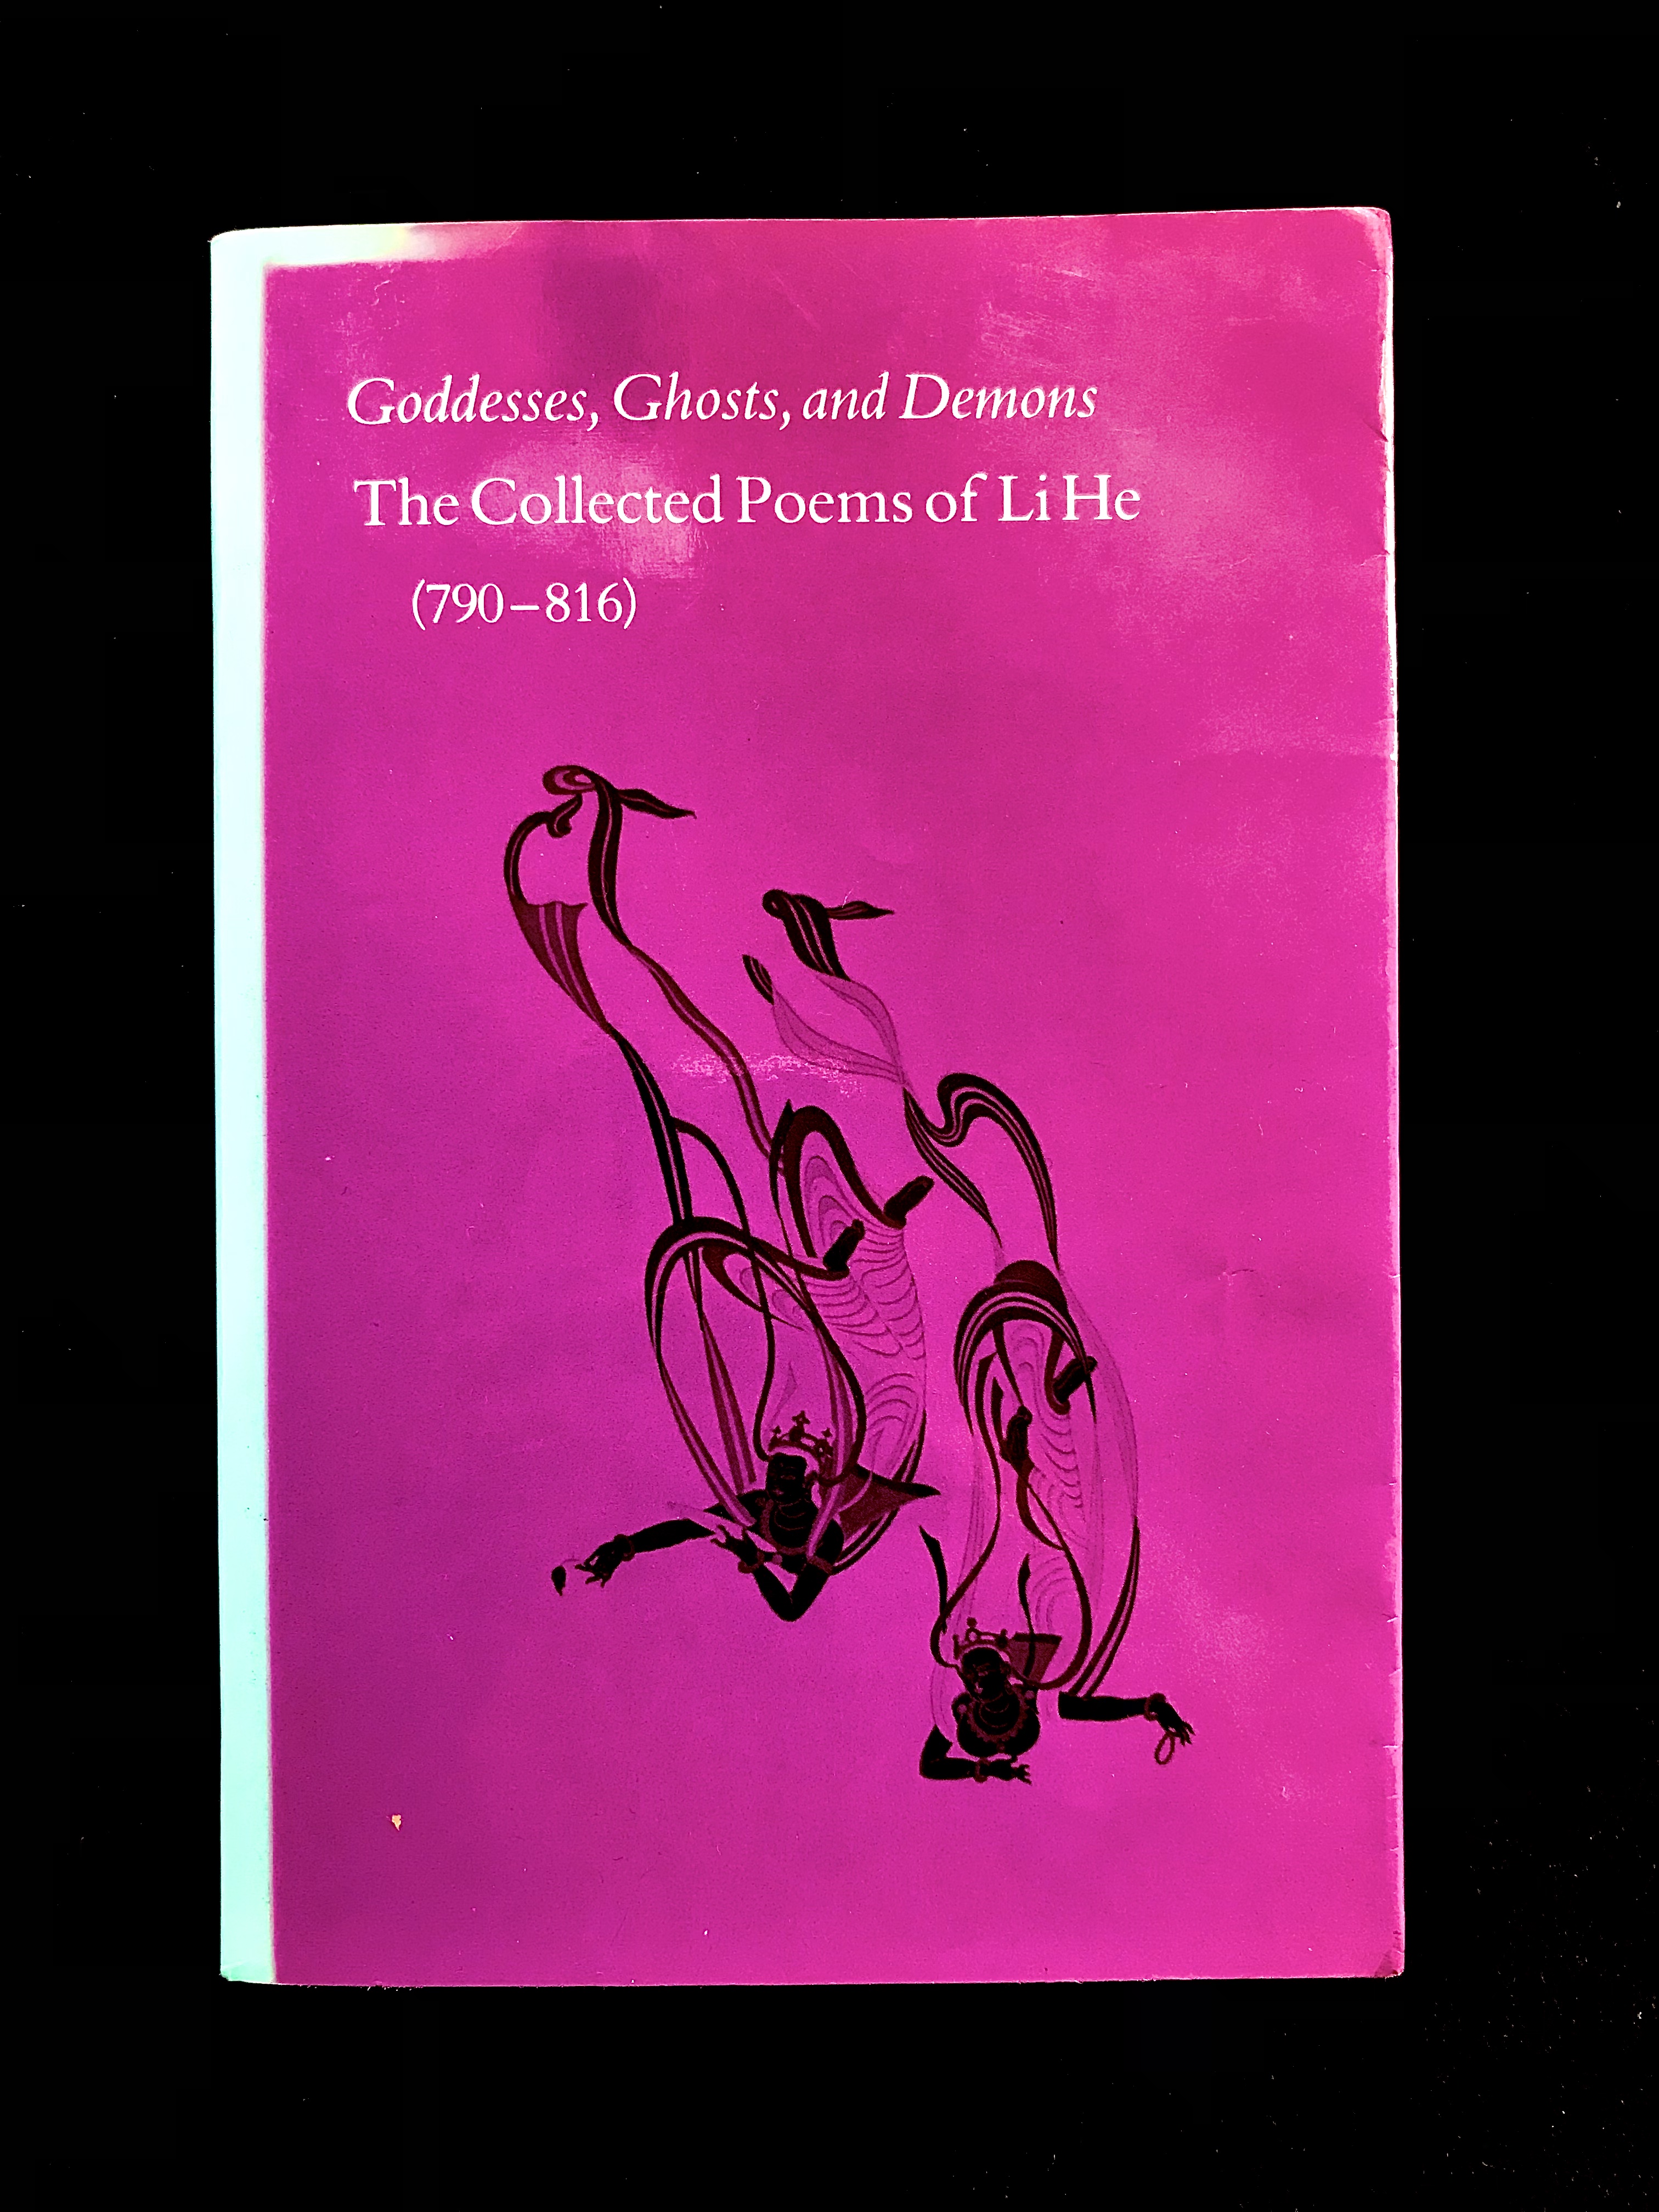 Goddesses, Ghosts, and Demons: The Collected Poems of Li He (790- 816)